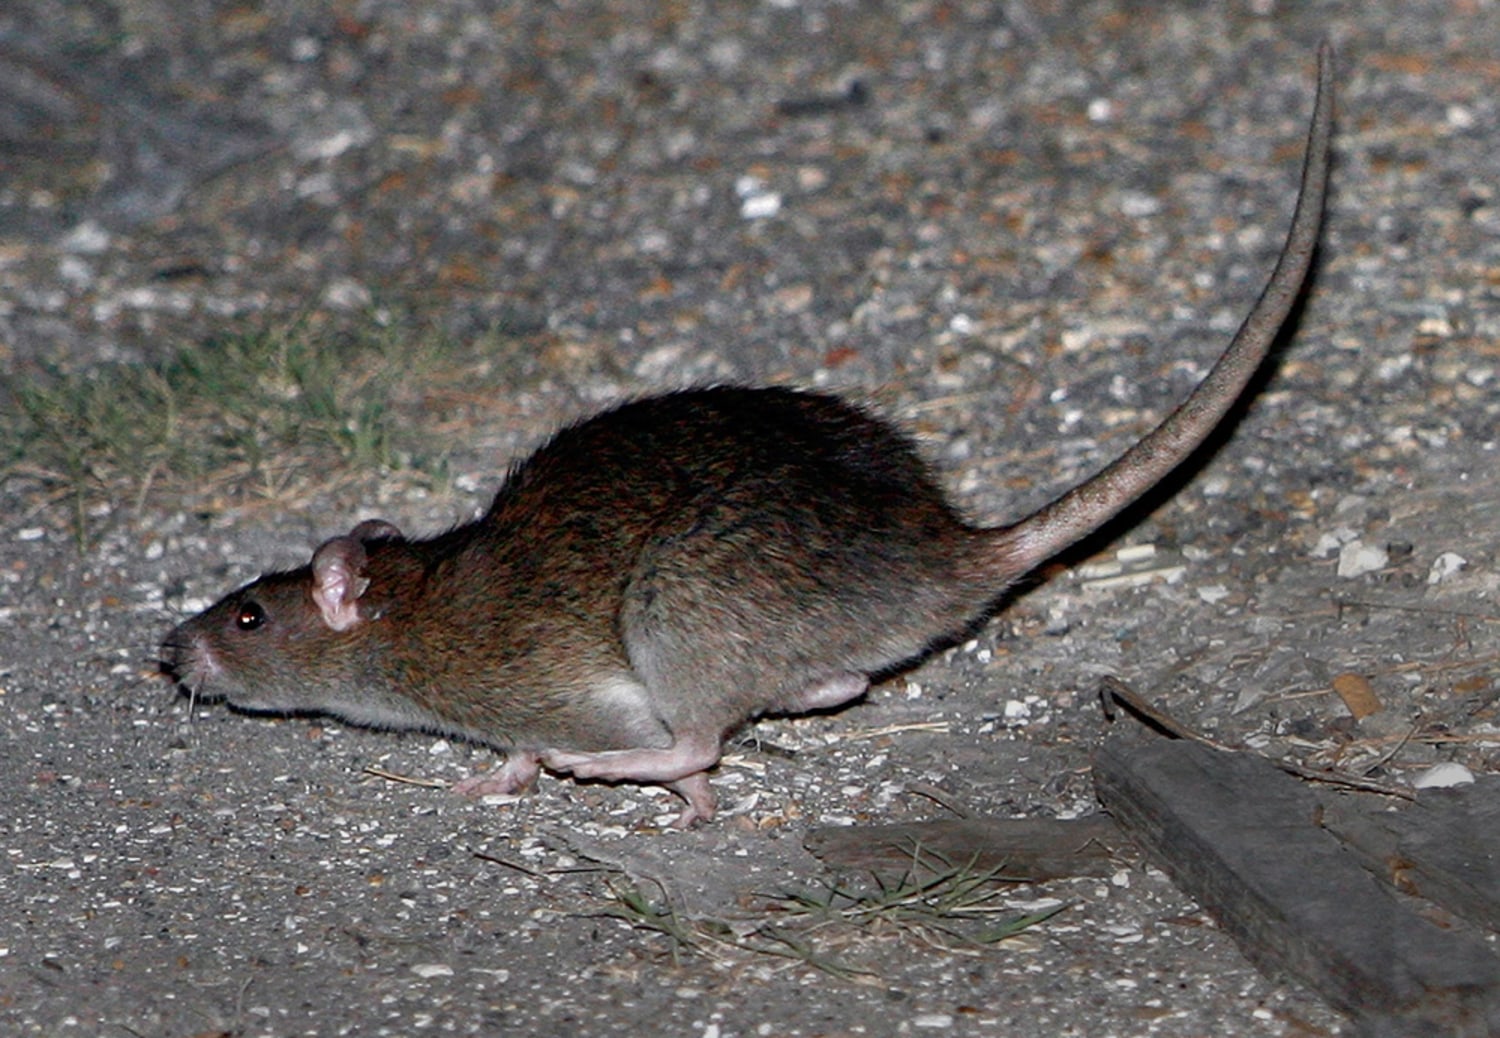 Lowly rat gnaws and chews its way to the top of rodent world